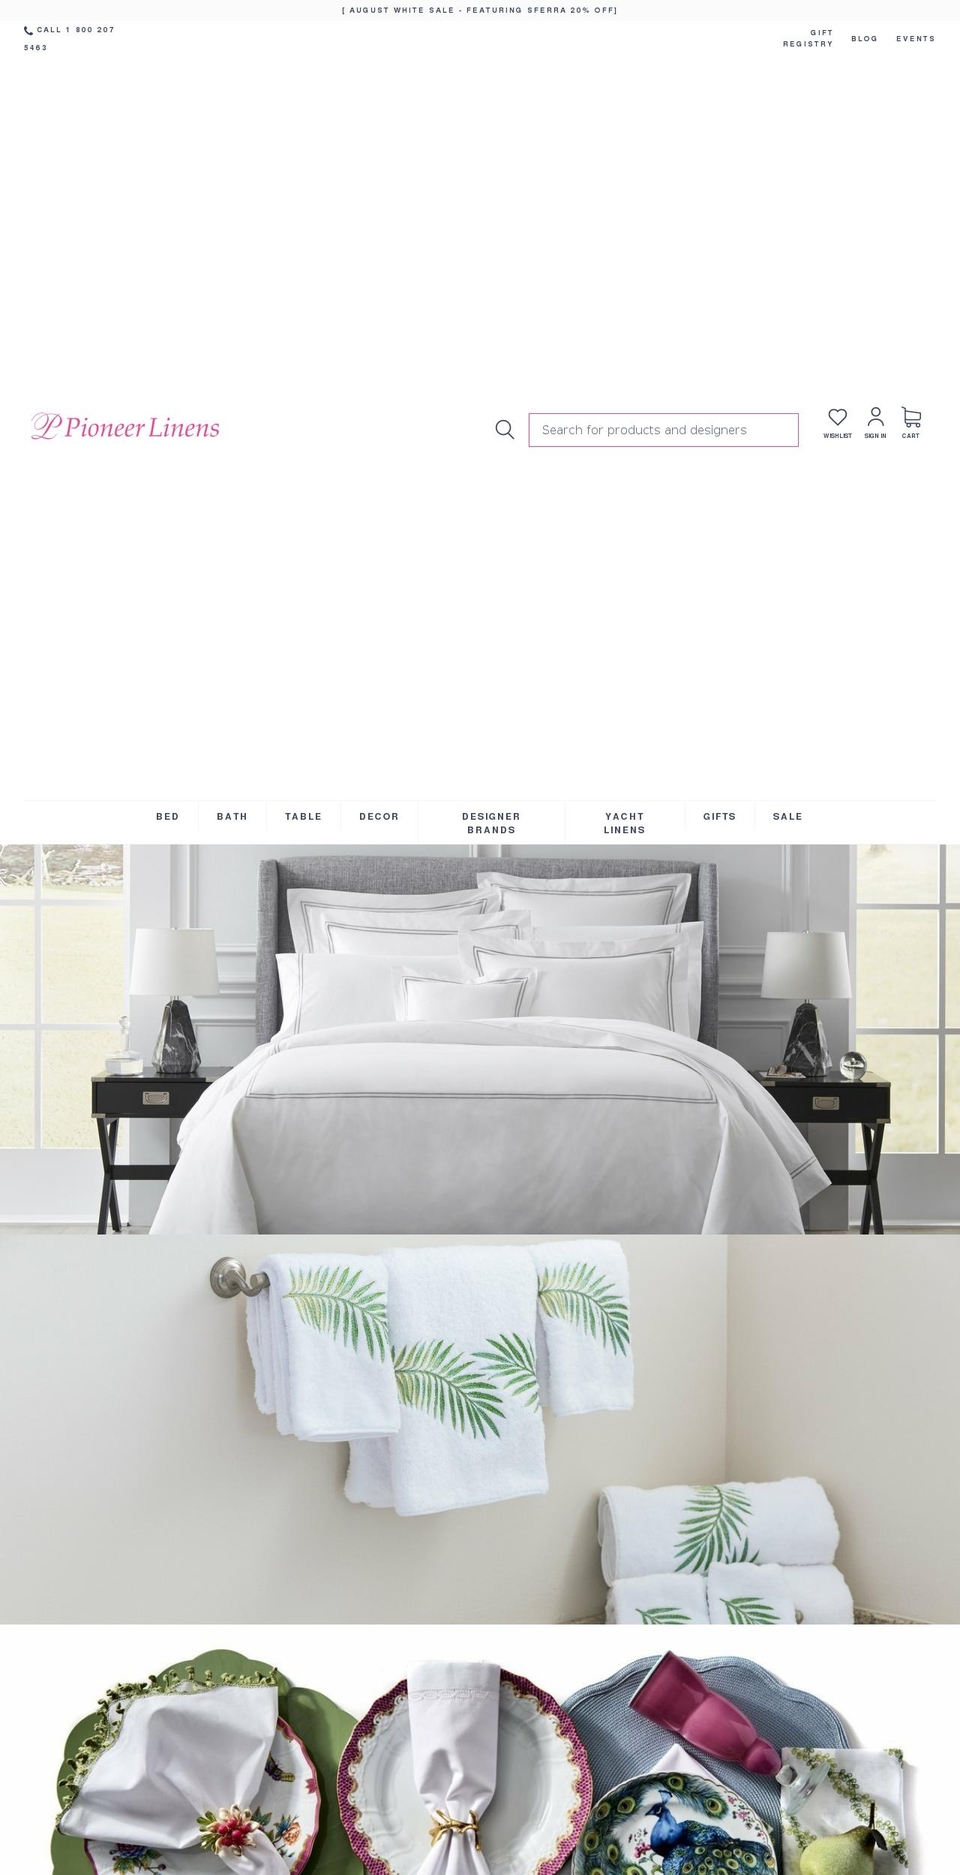 Buko Shopify Theme - Products Consolidation Shopify theme site example thegracecompanylinens.com